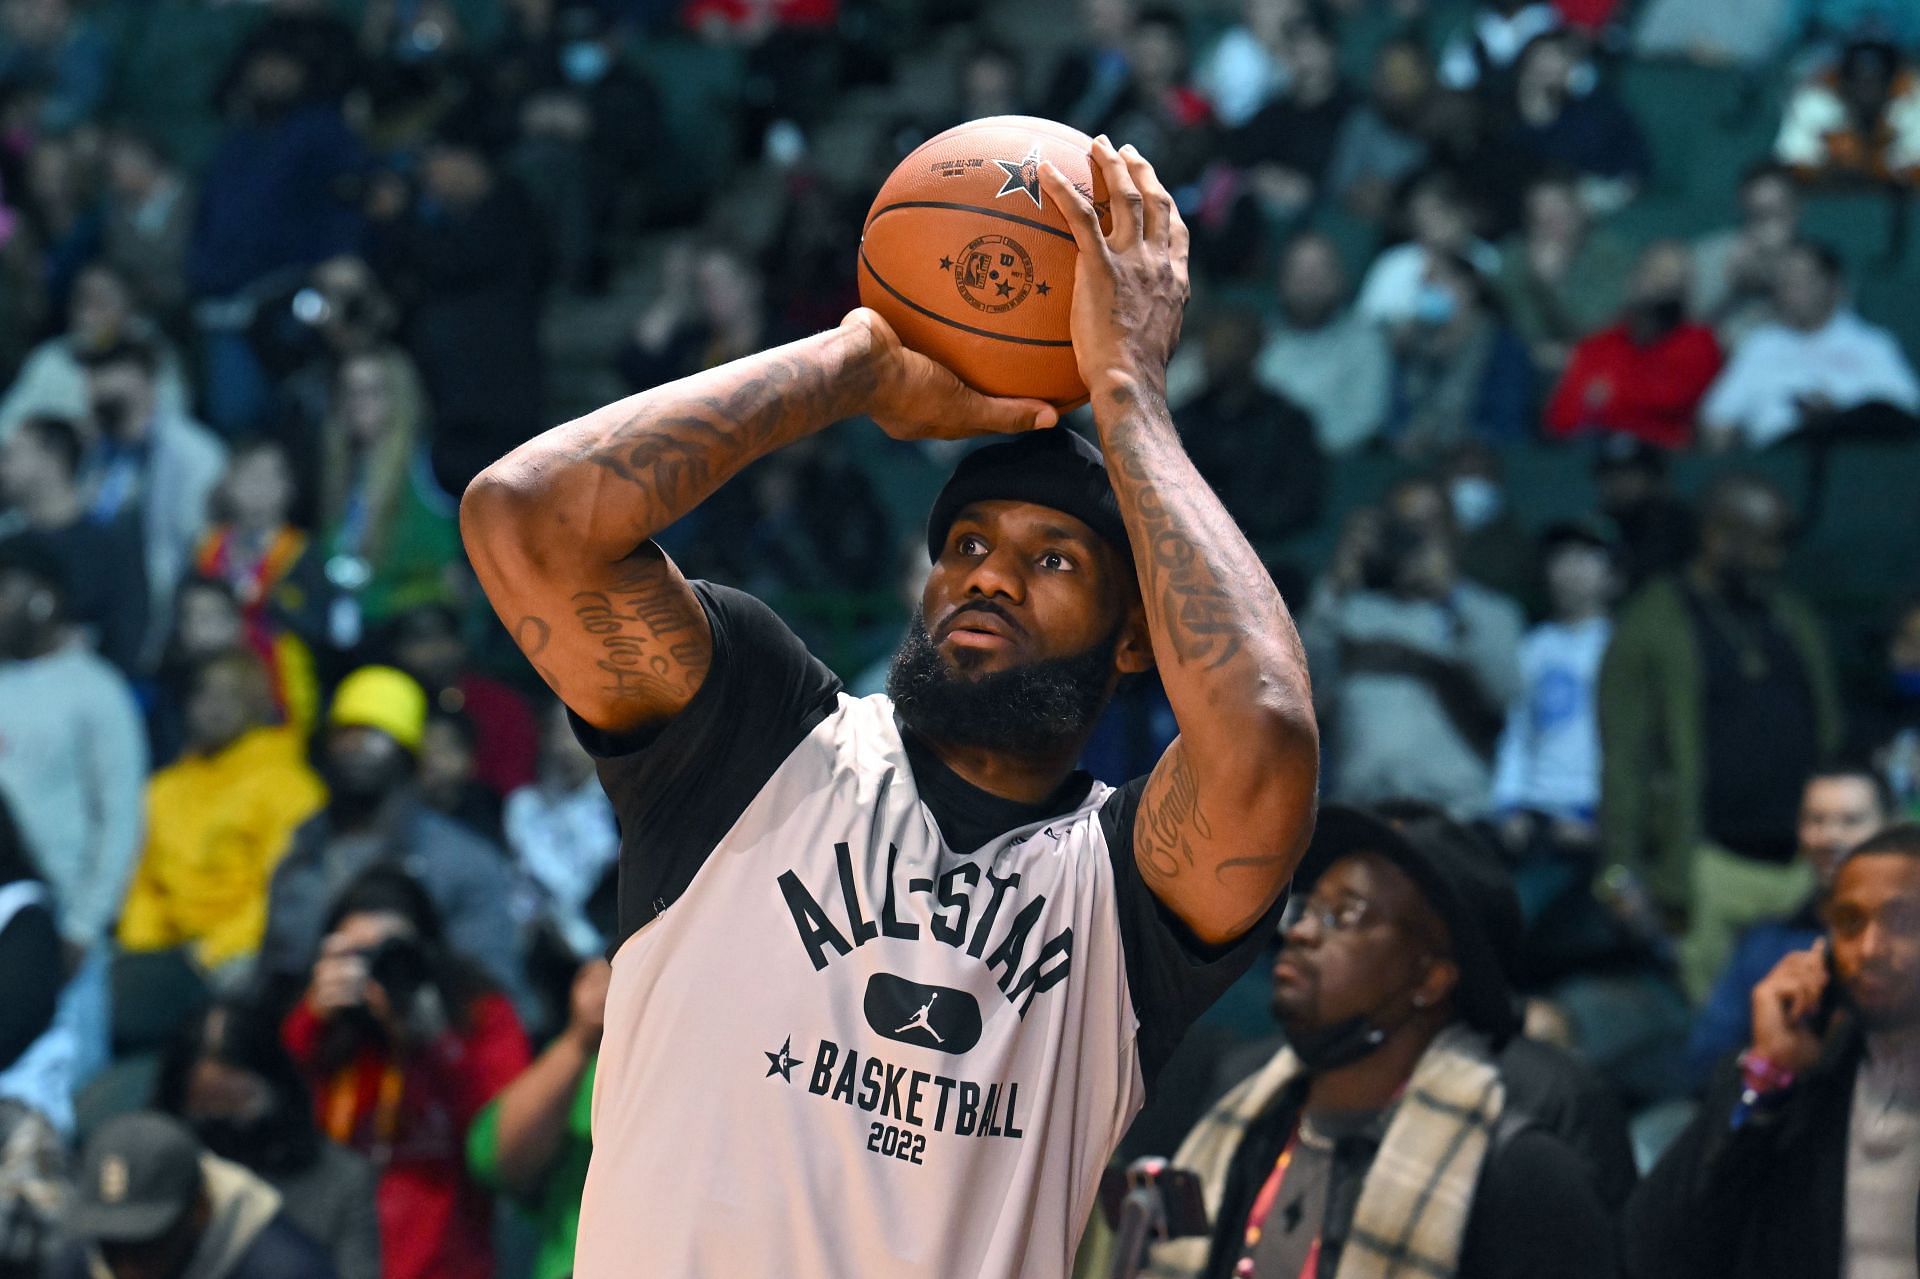 2022 NBA All-Star LeBron James at the All-Star practice